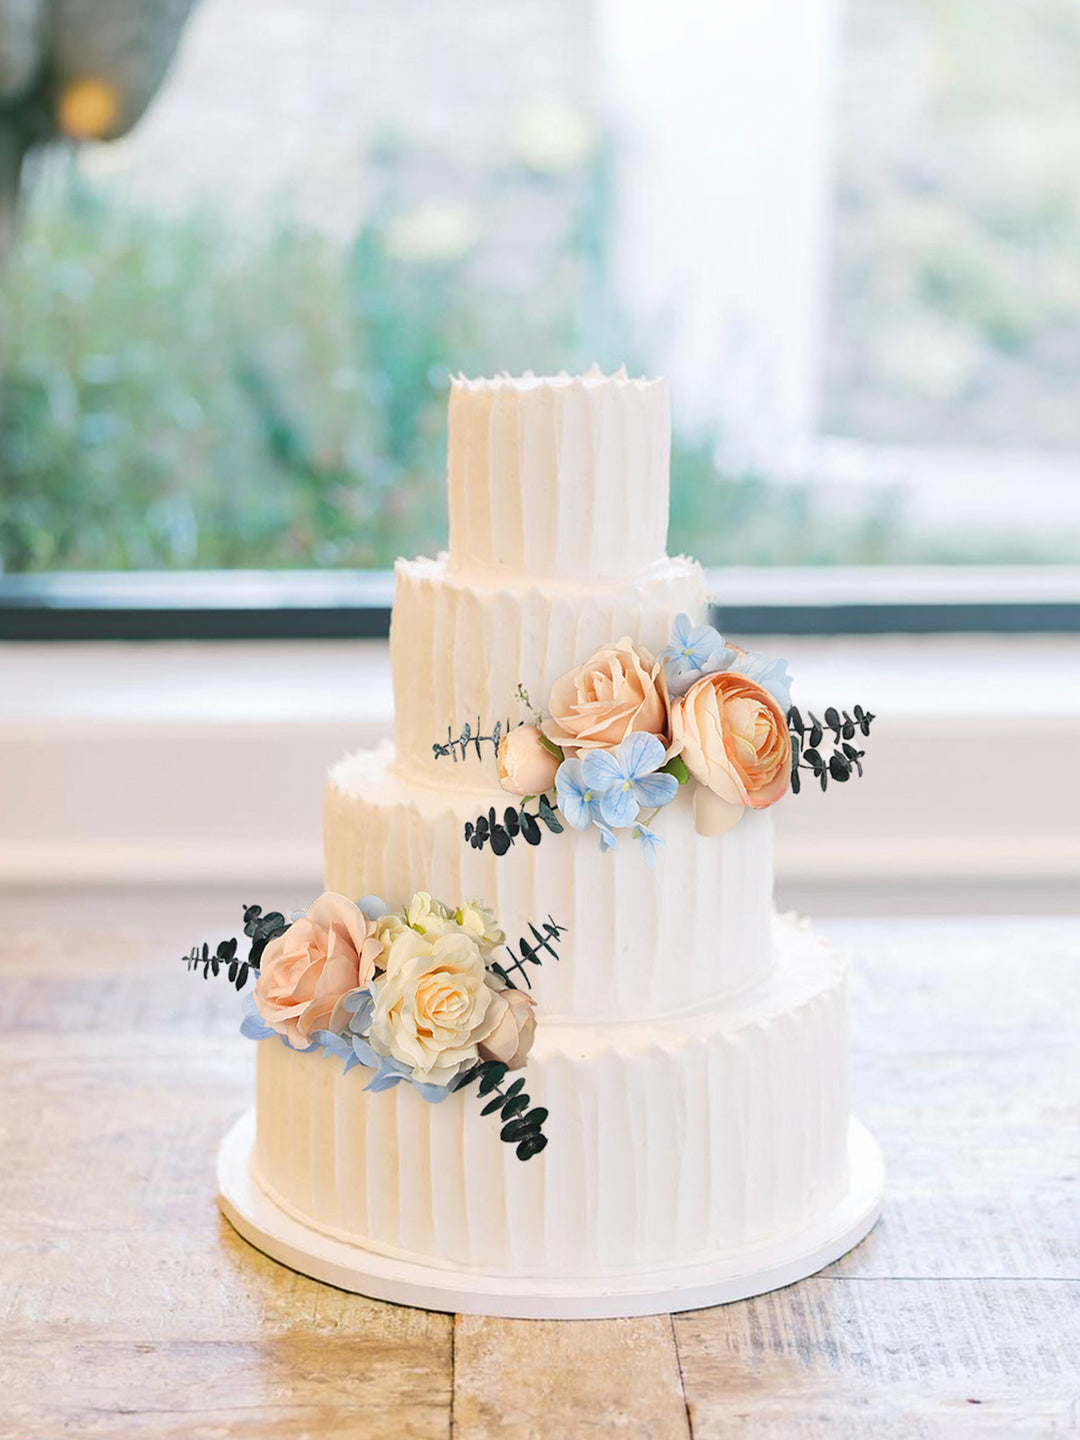 Choosing Between Artificial and Real Flowers for Cake Decor: What You Need to Know